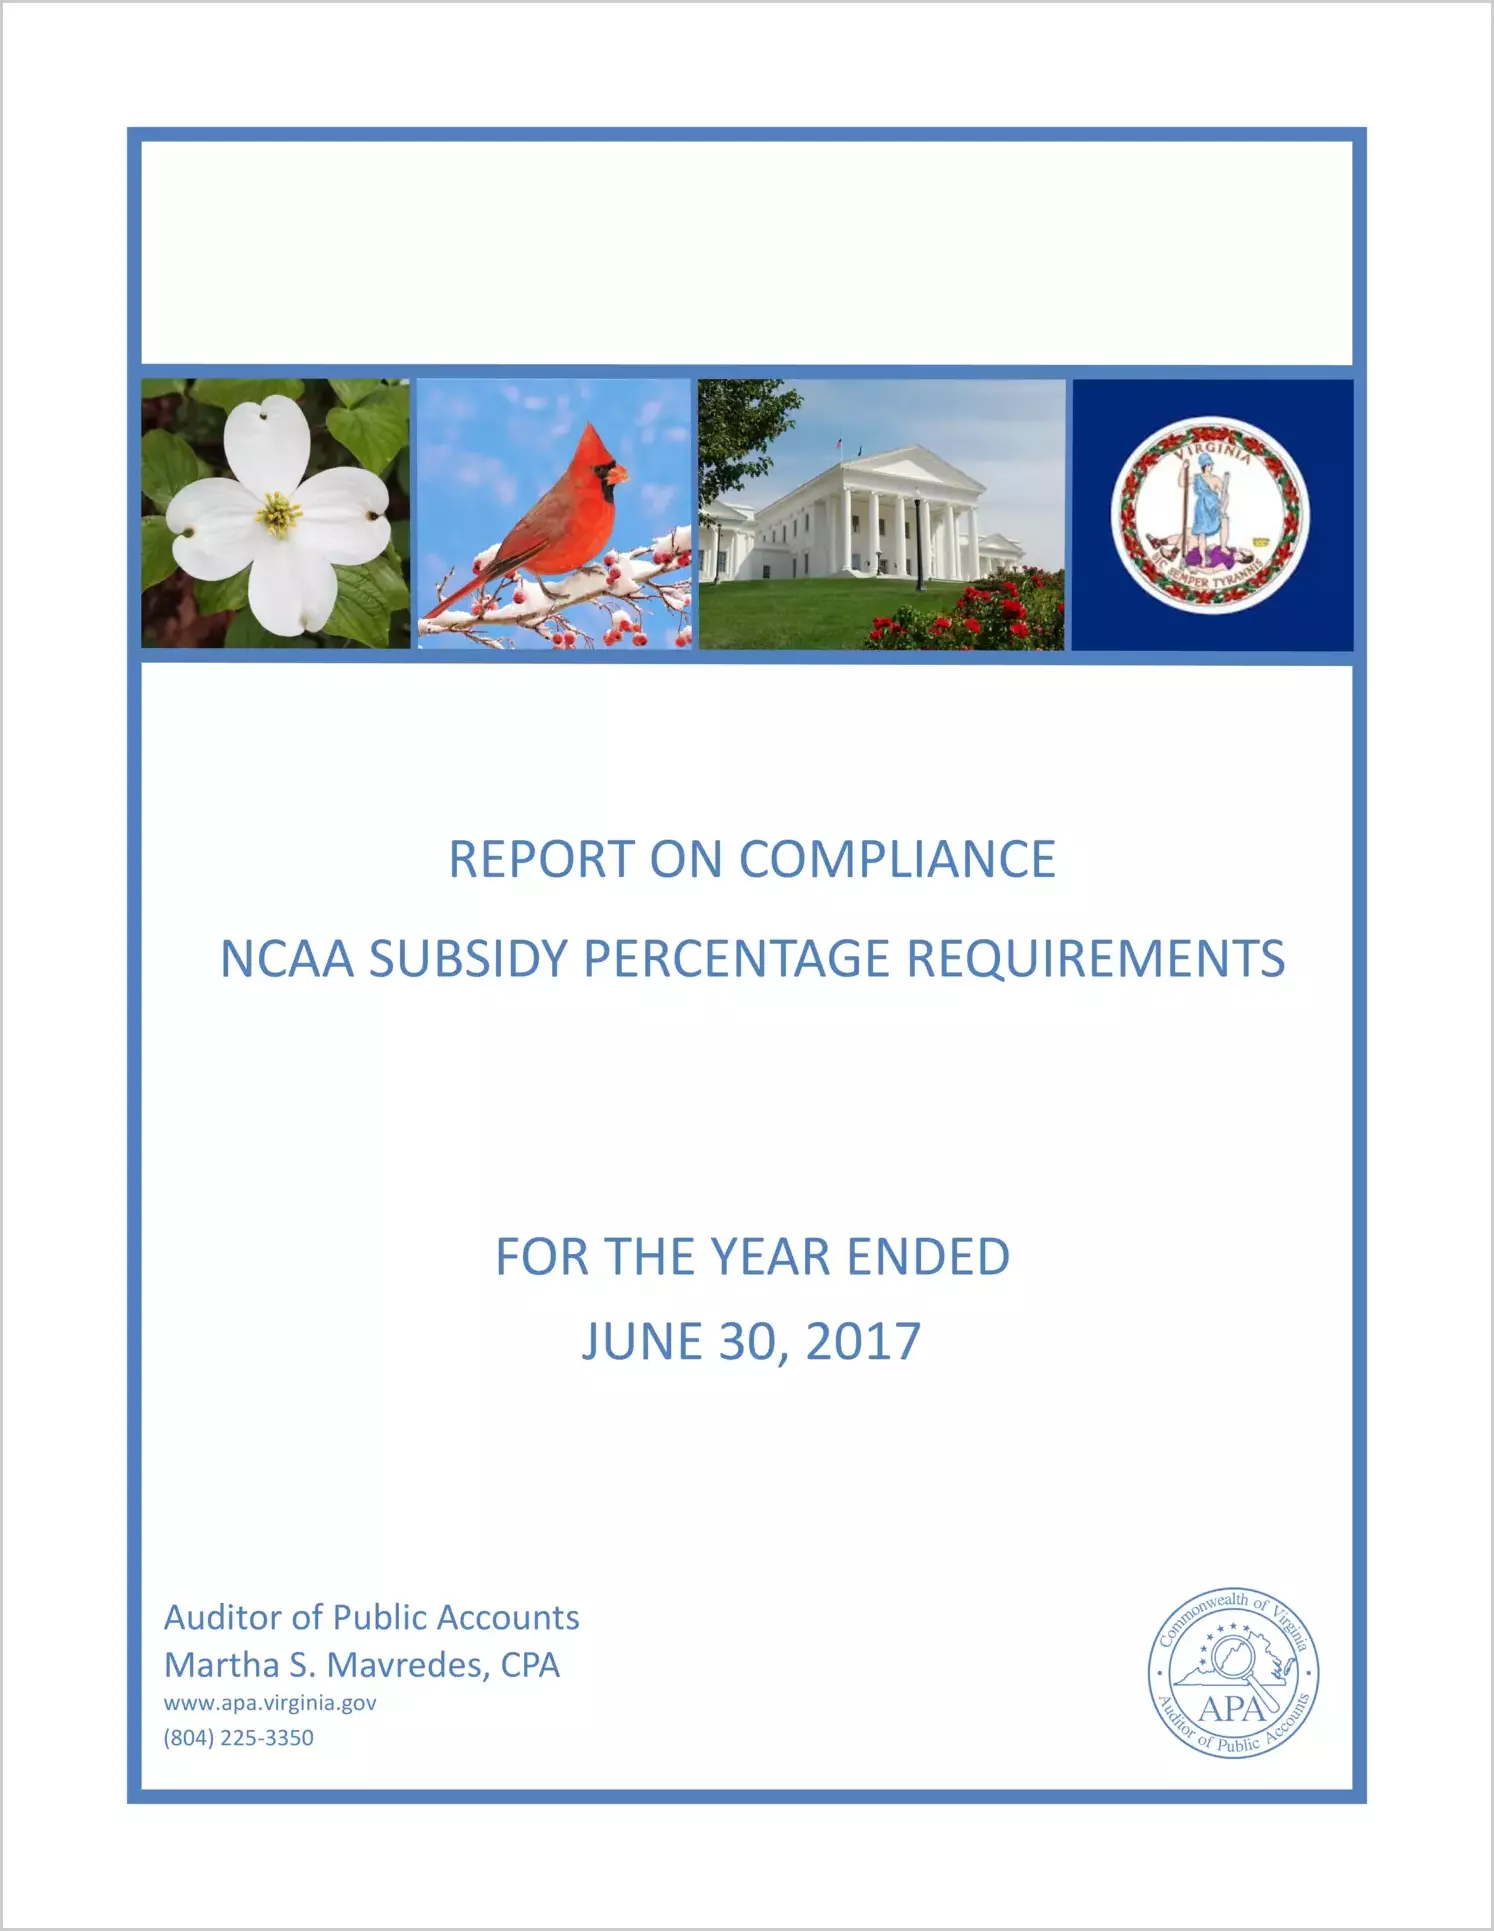 Report on Compliance - NCAA Subsidy Percentage Requirements for the year ended June 30, 2017